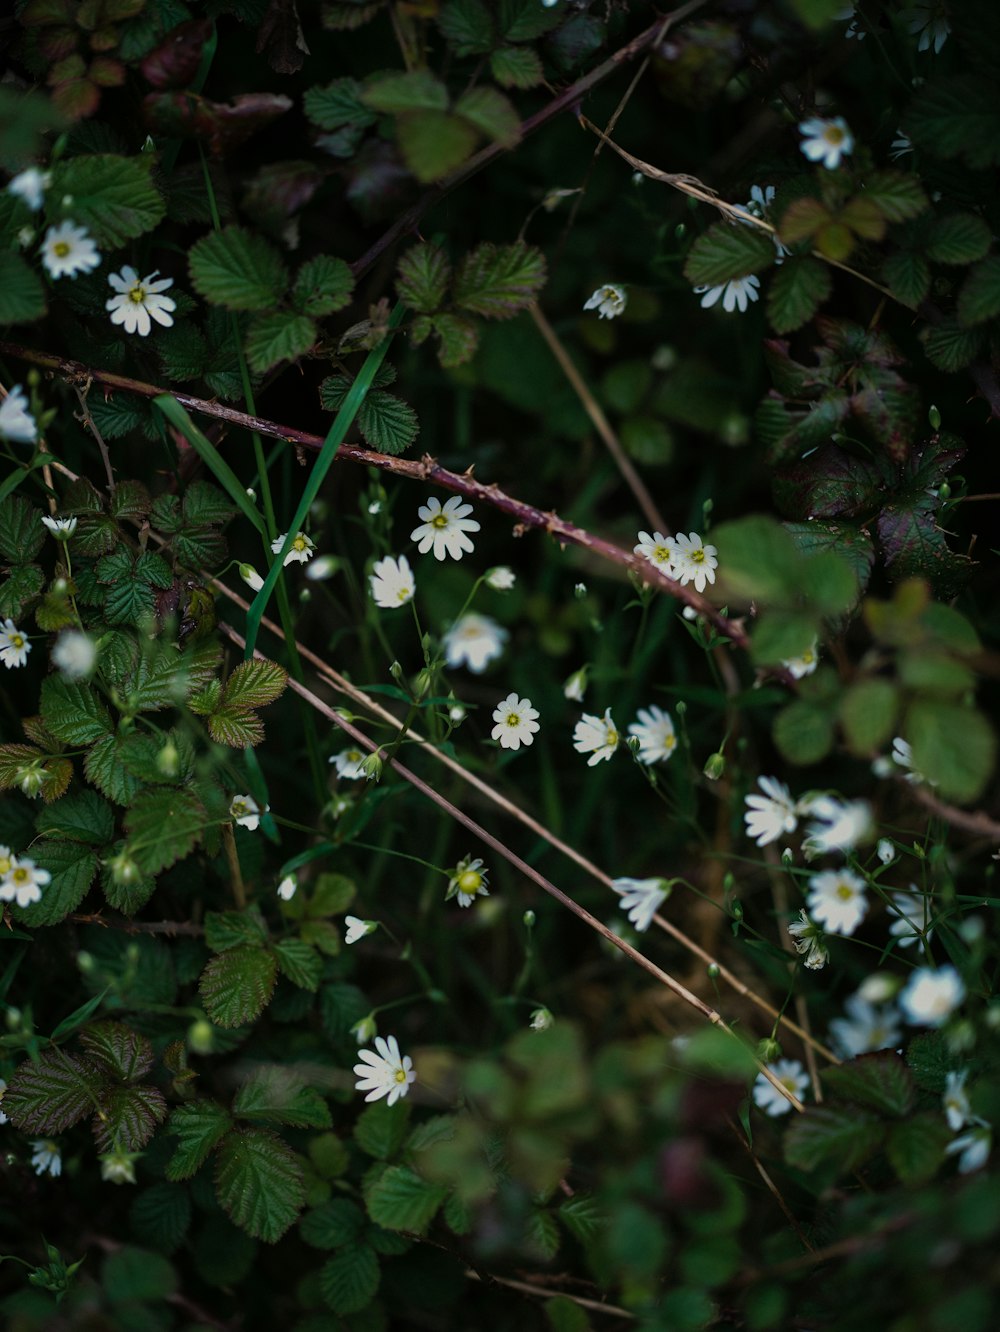 a bunch of white flowers growing on a bush